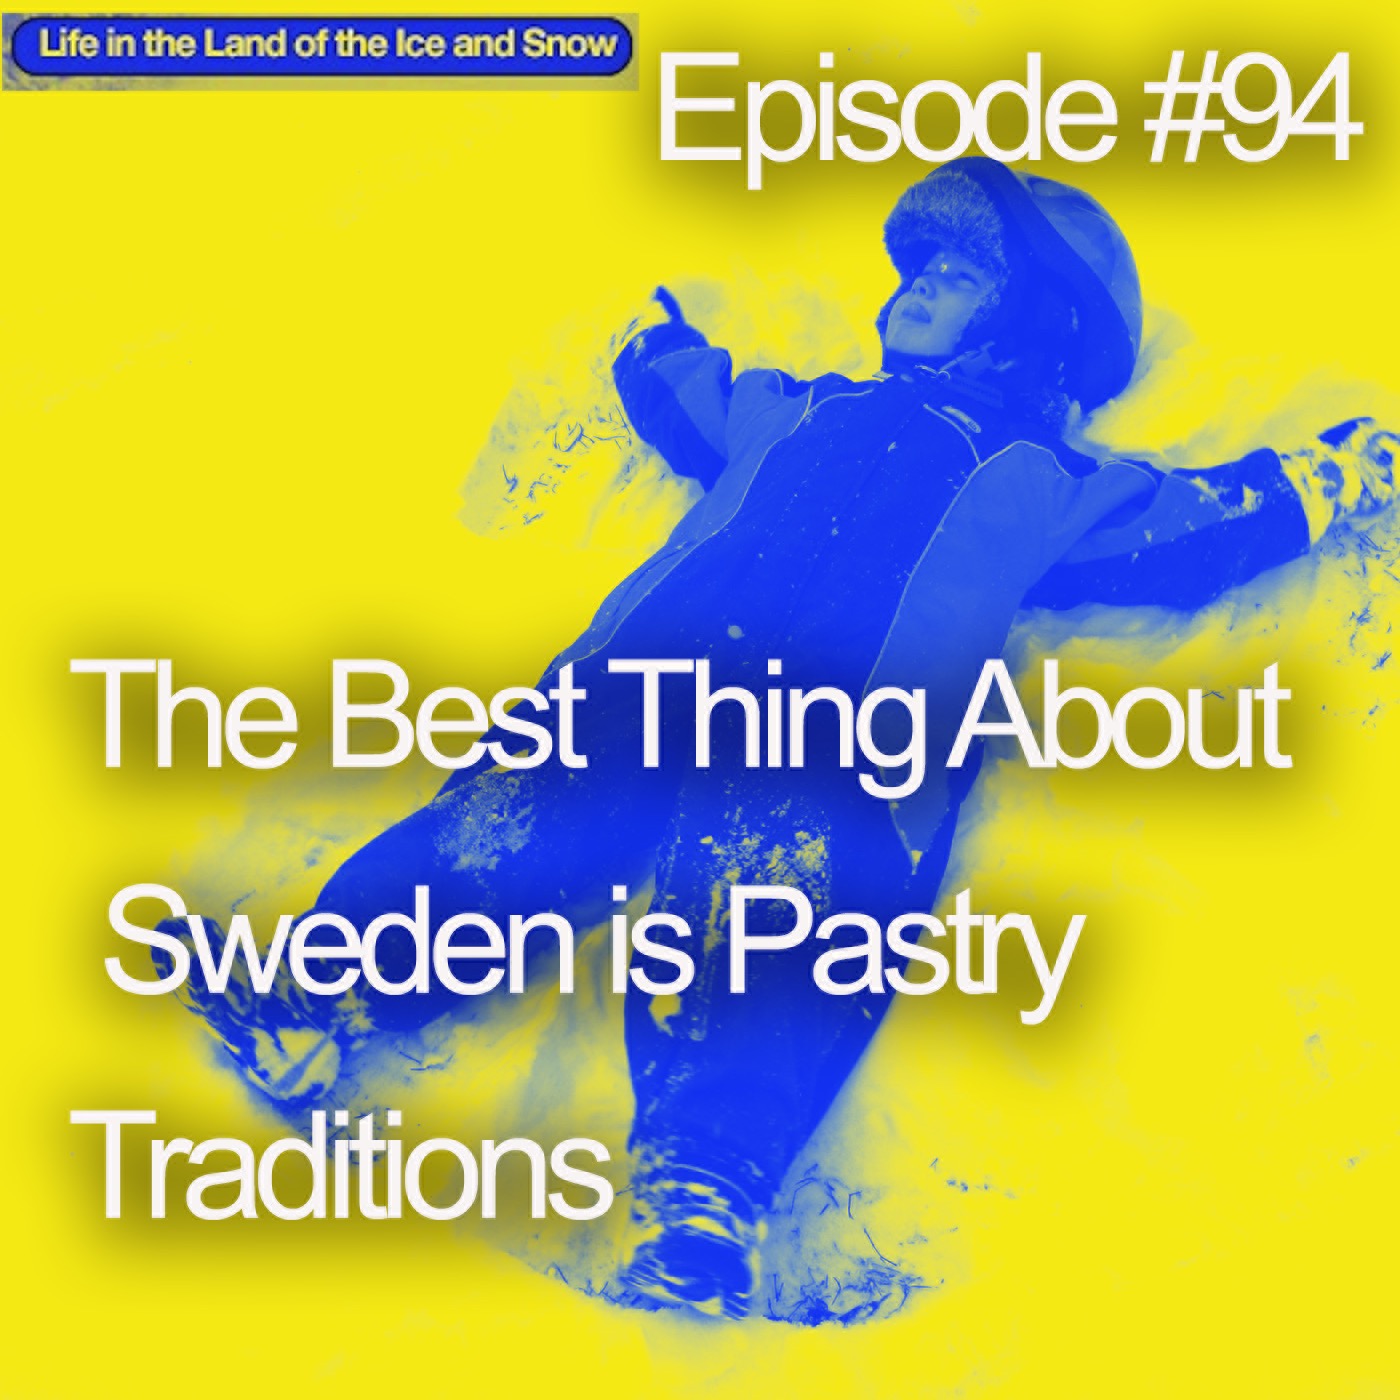 #94 The Best Thing About Sweden is Pastry Traditions